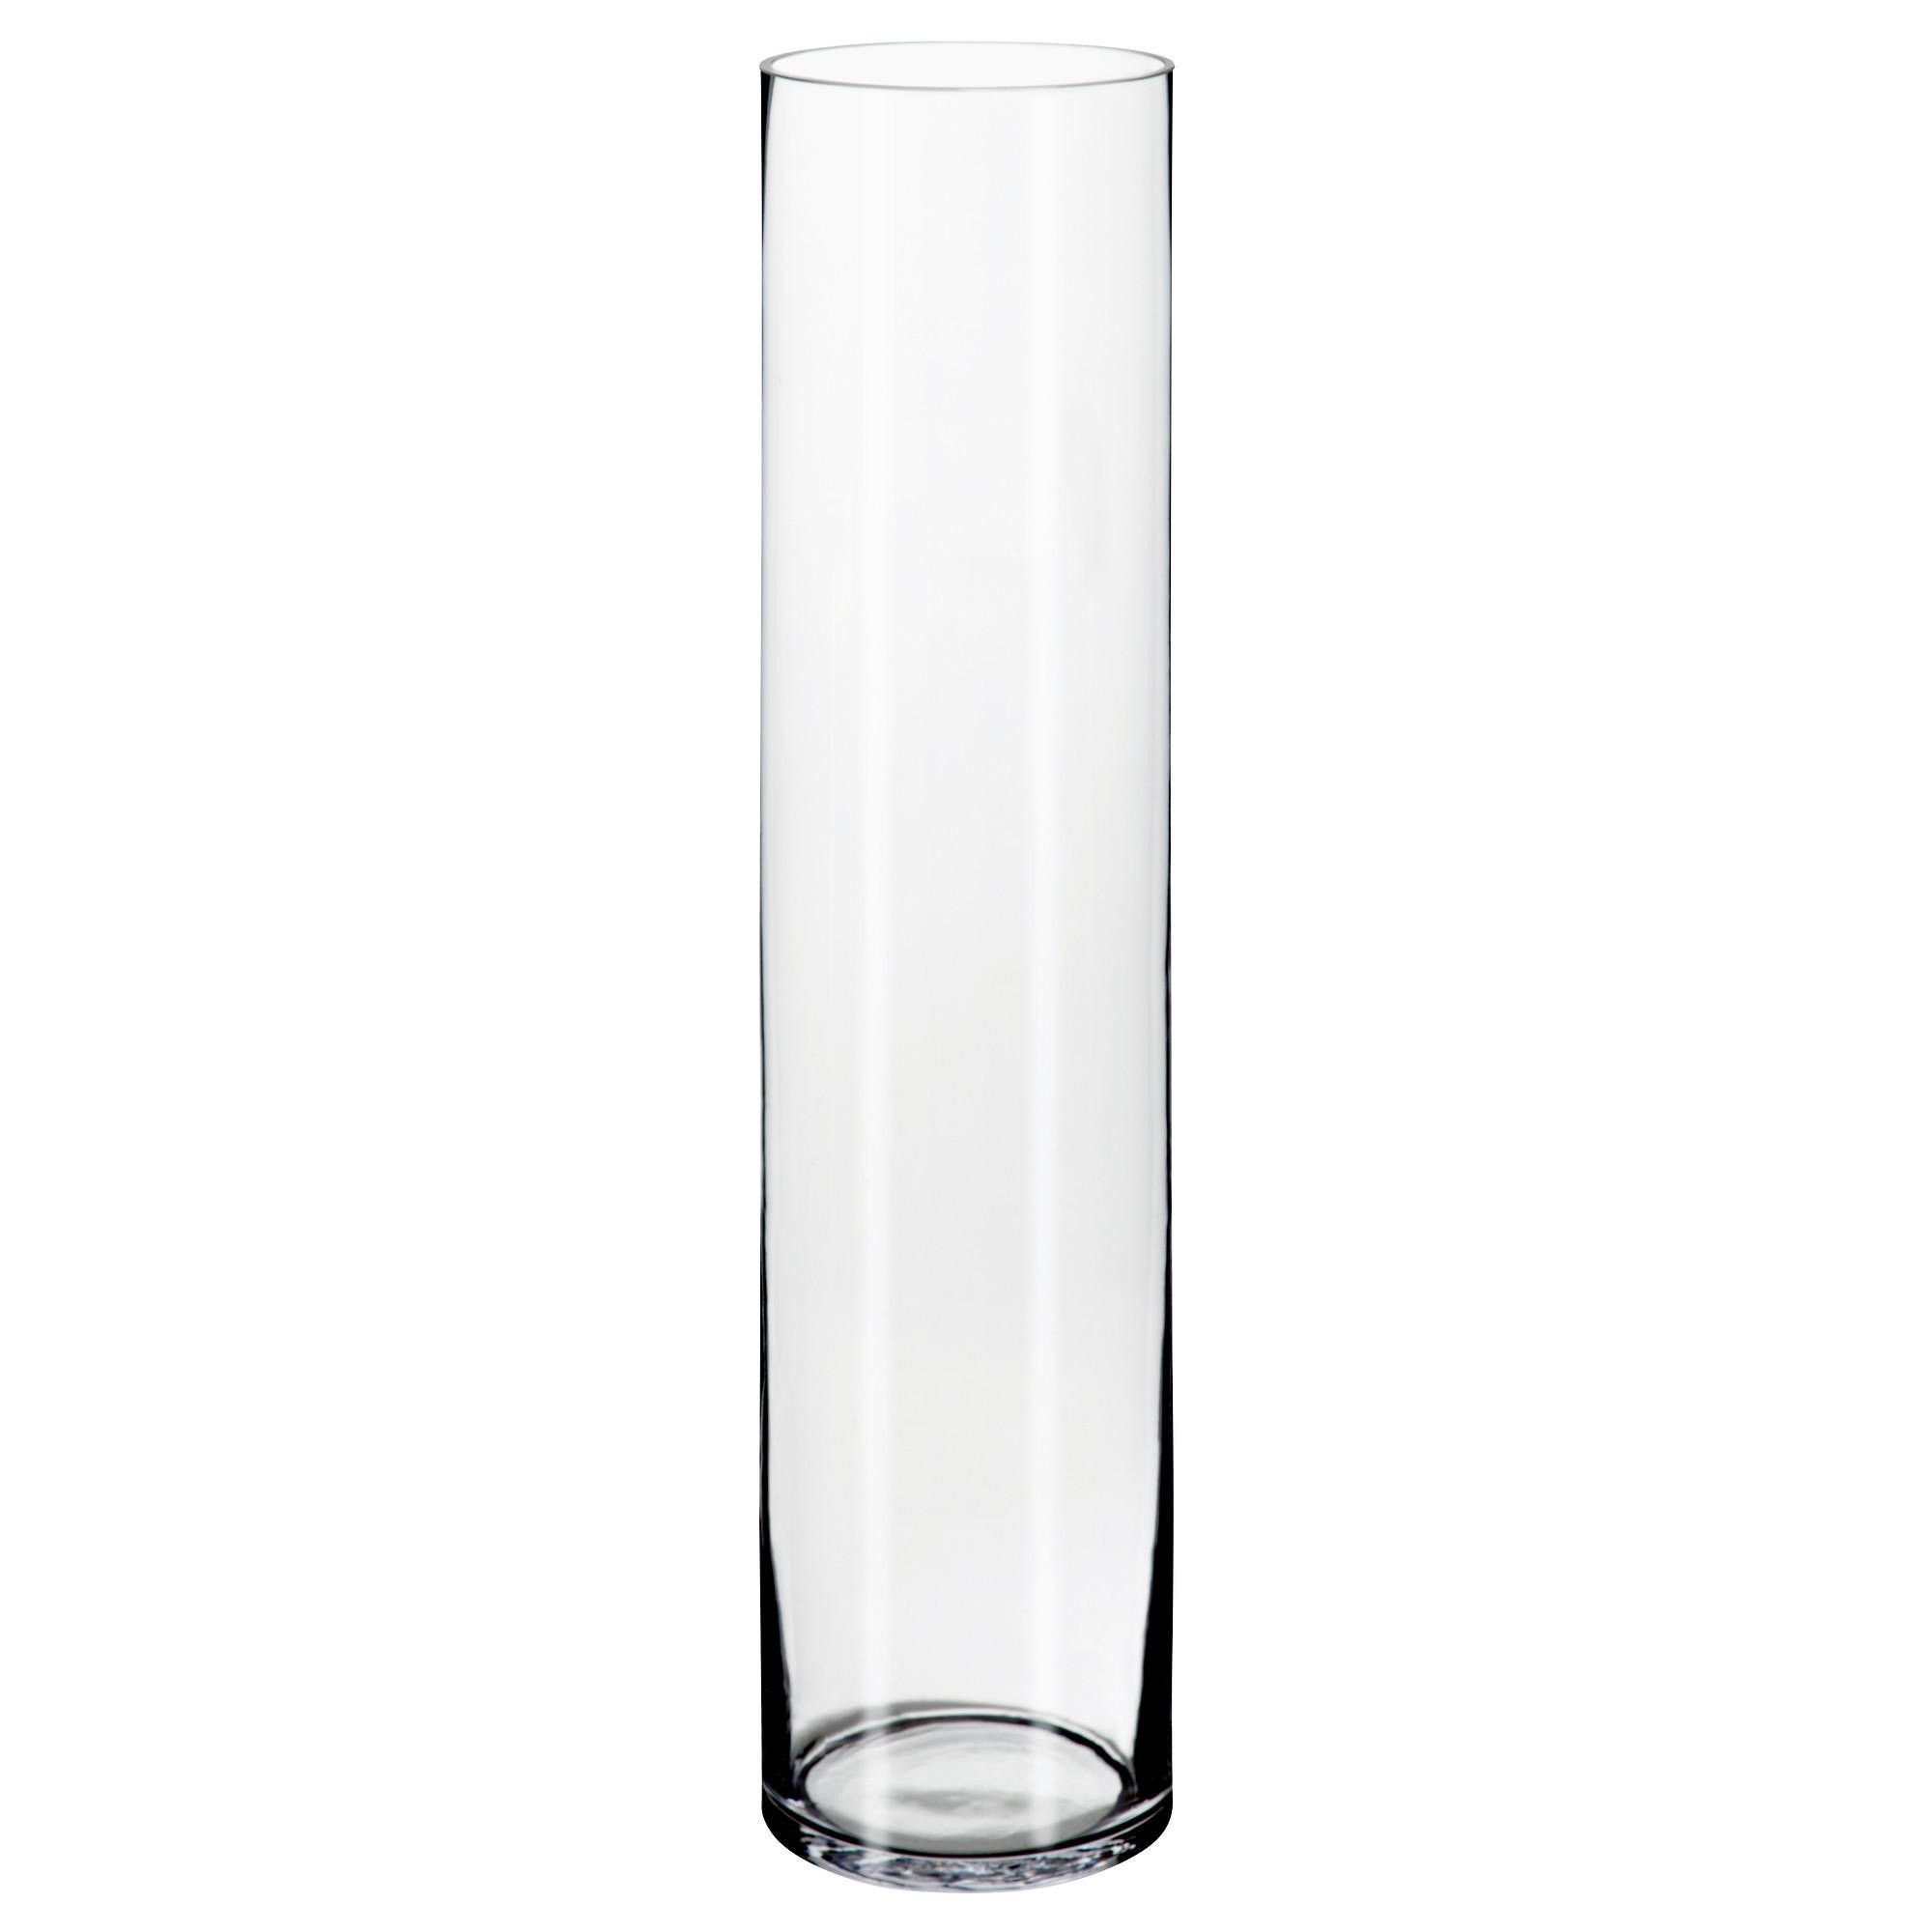 White Frosted Glass Vase Of 50 Smoked Glass Vase the Weekly World Inside Coloring Colored Glass Vases Elegant Living Room Vase Glass Fresh